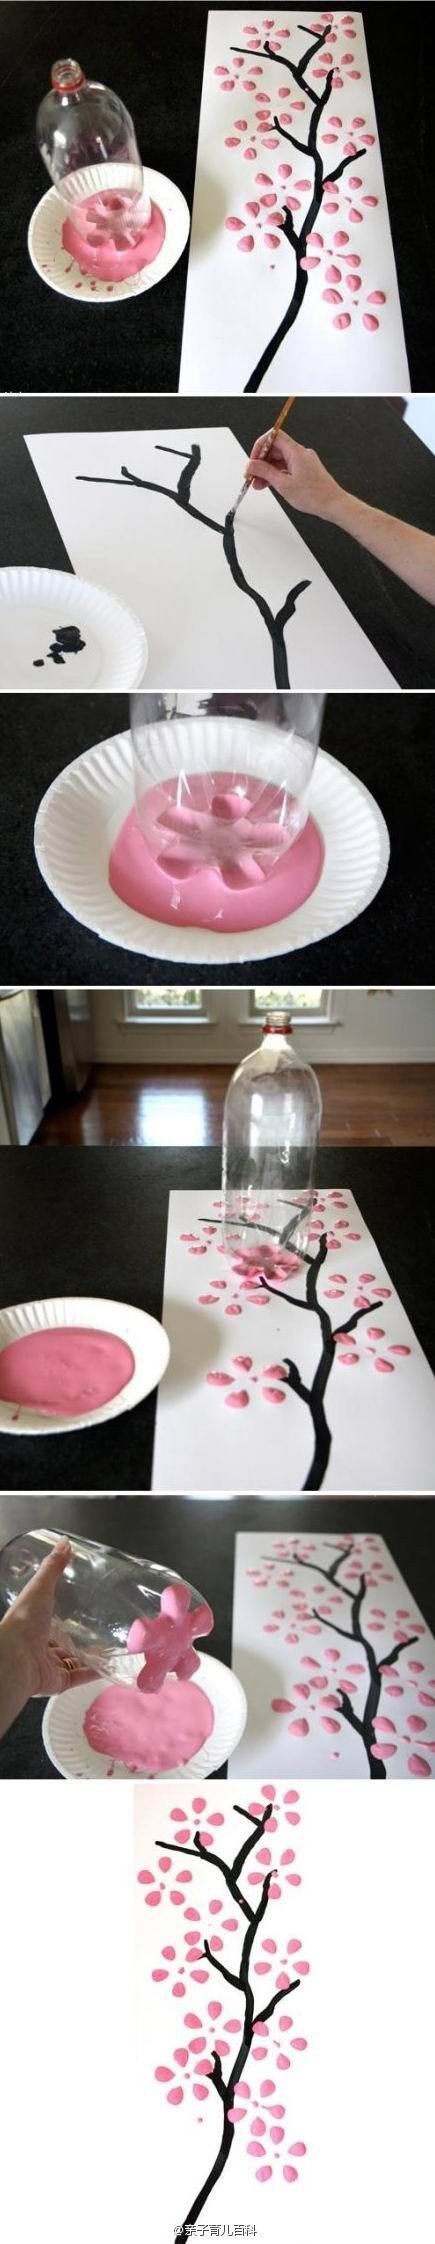 Art is not difficult. Plastic bottles can create beautiful cheery flower with little